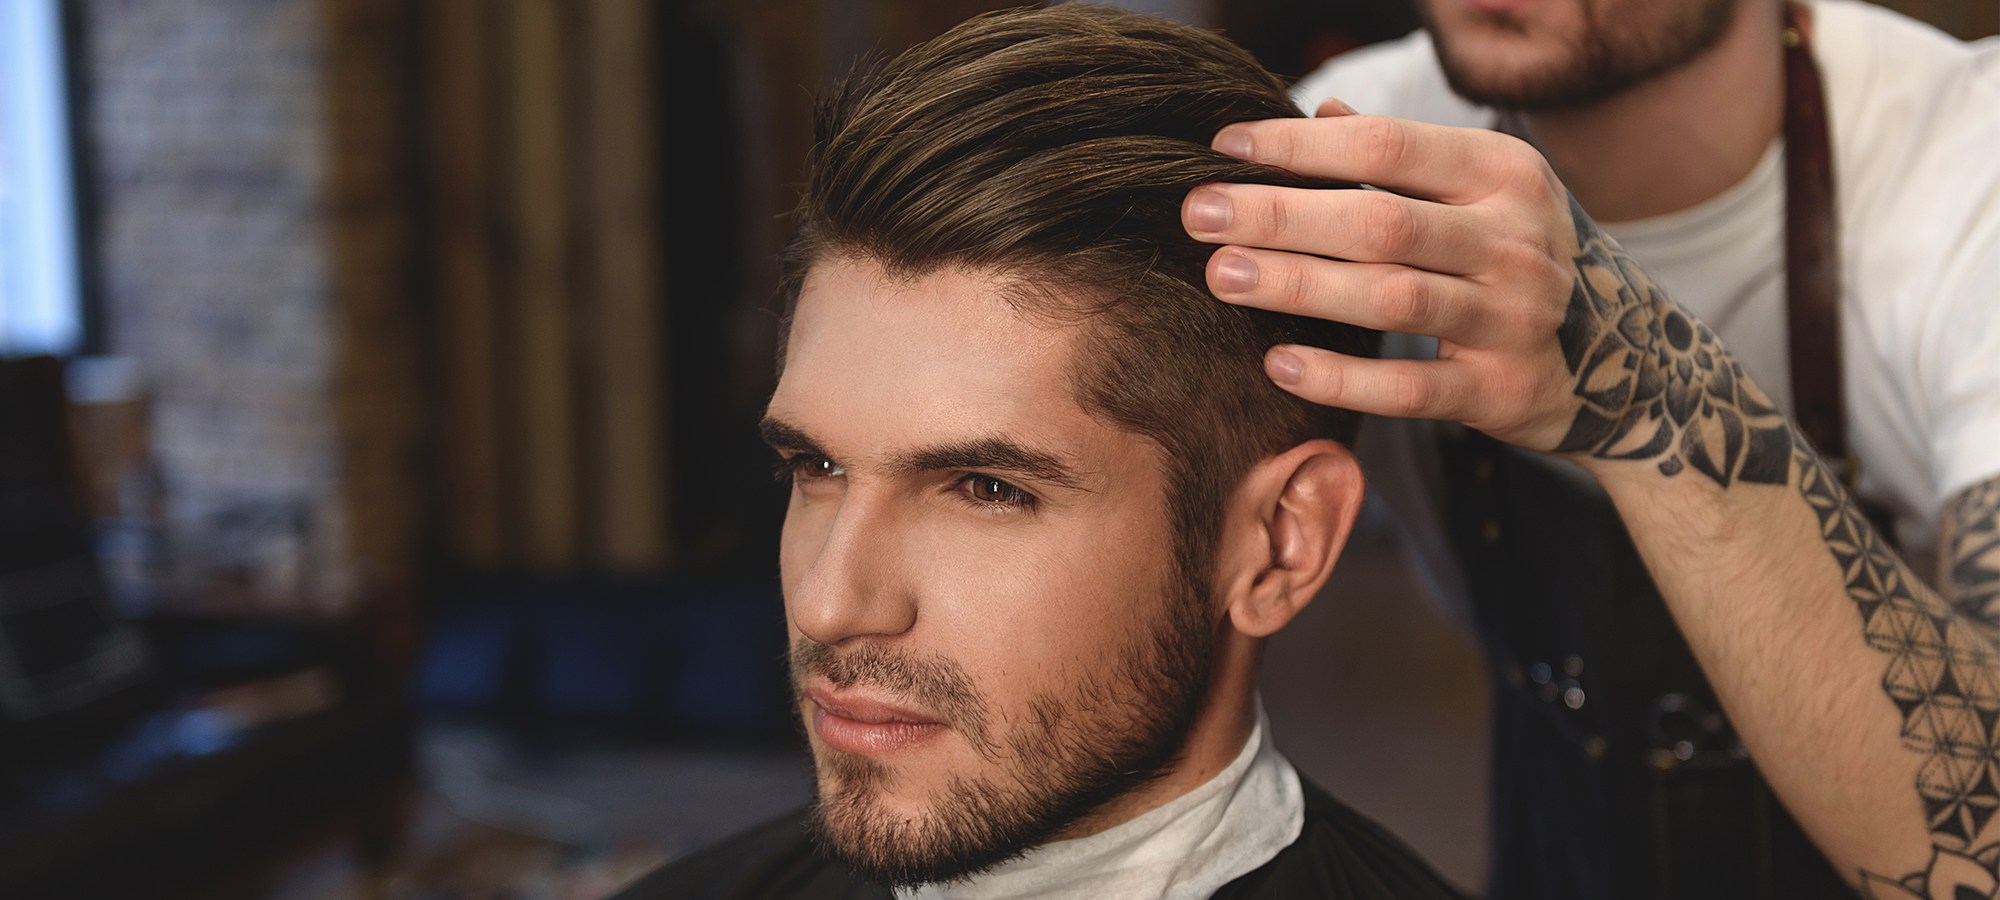 Best hairstyles for short guys to look taller?